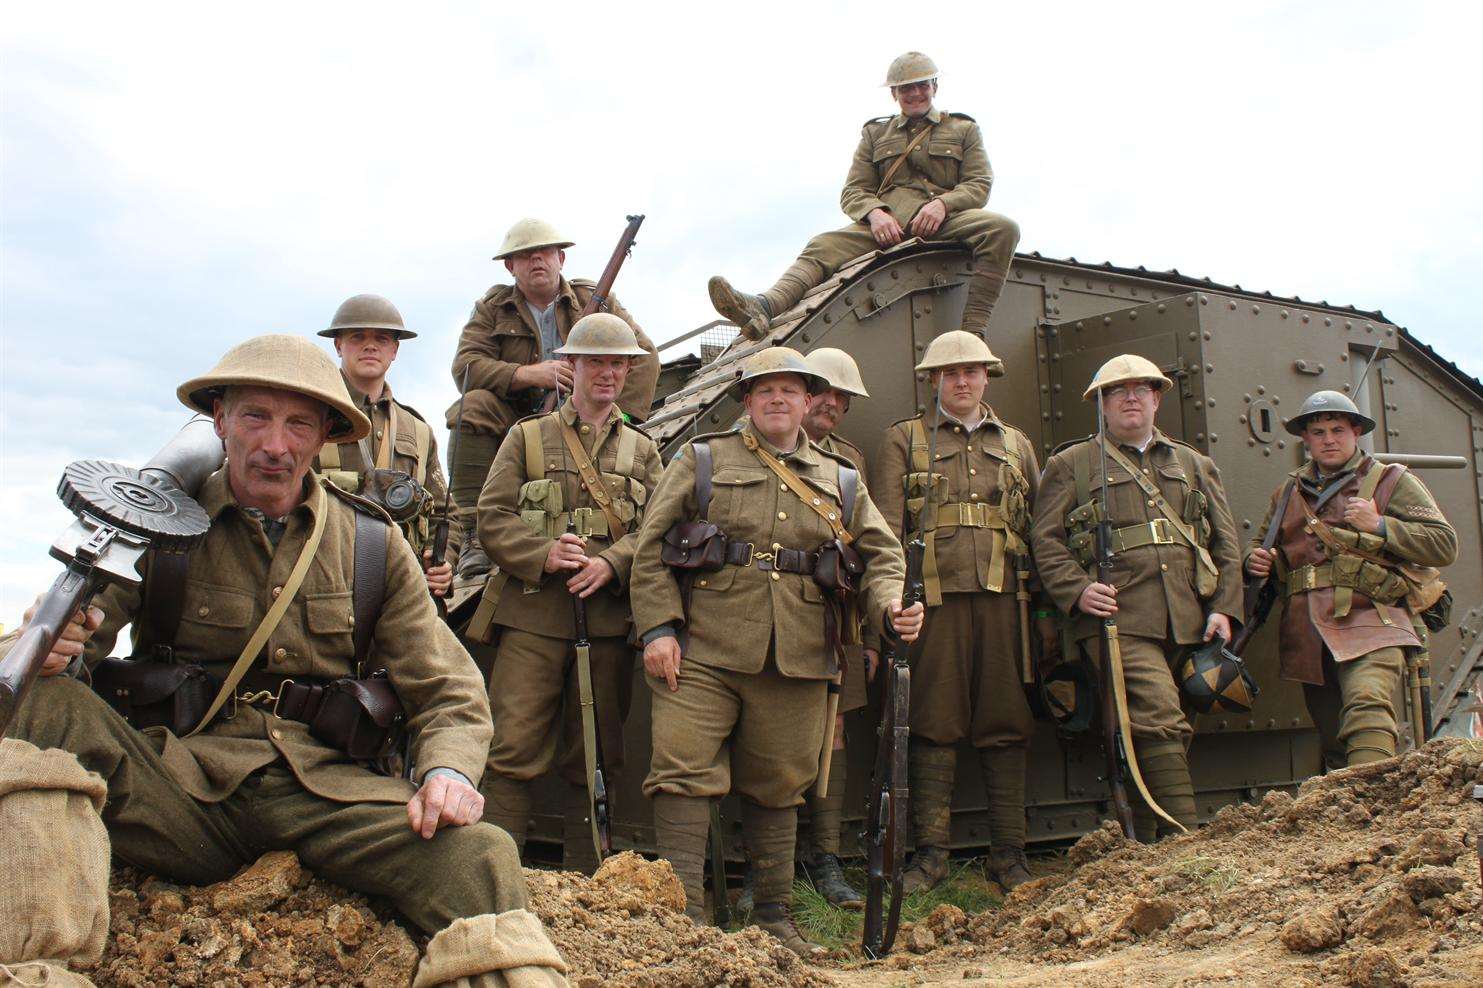 Re-enactors will put on a show at Combined Ops